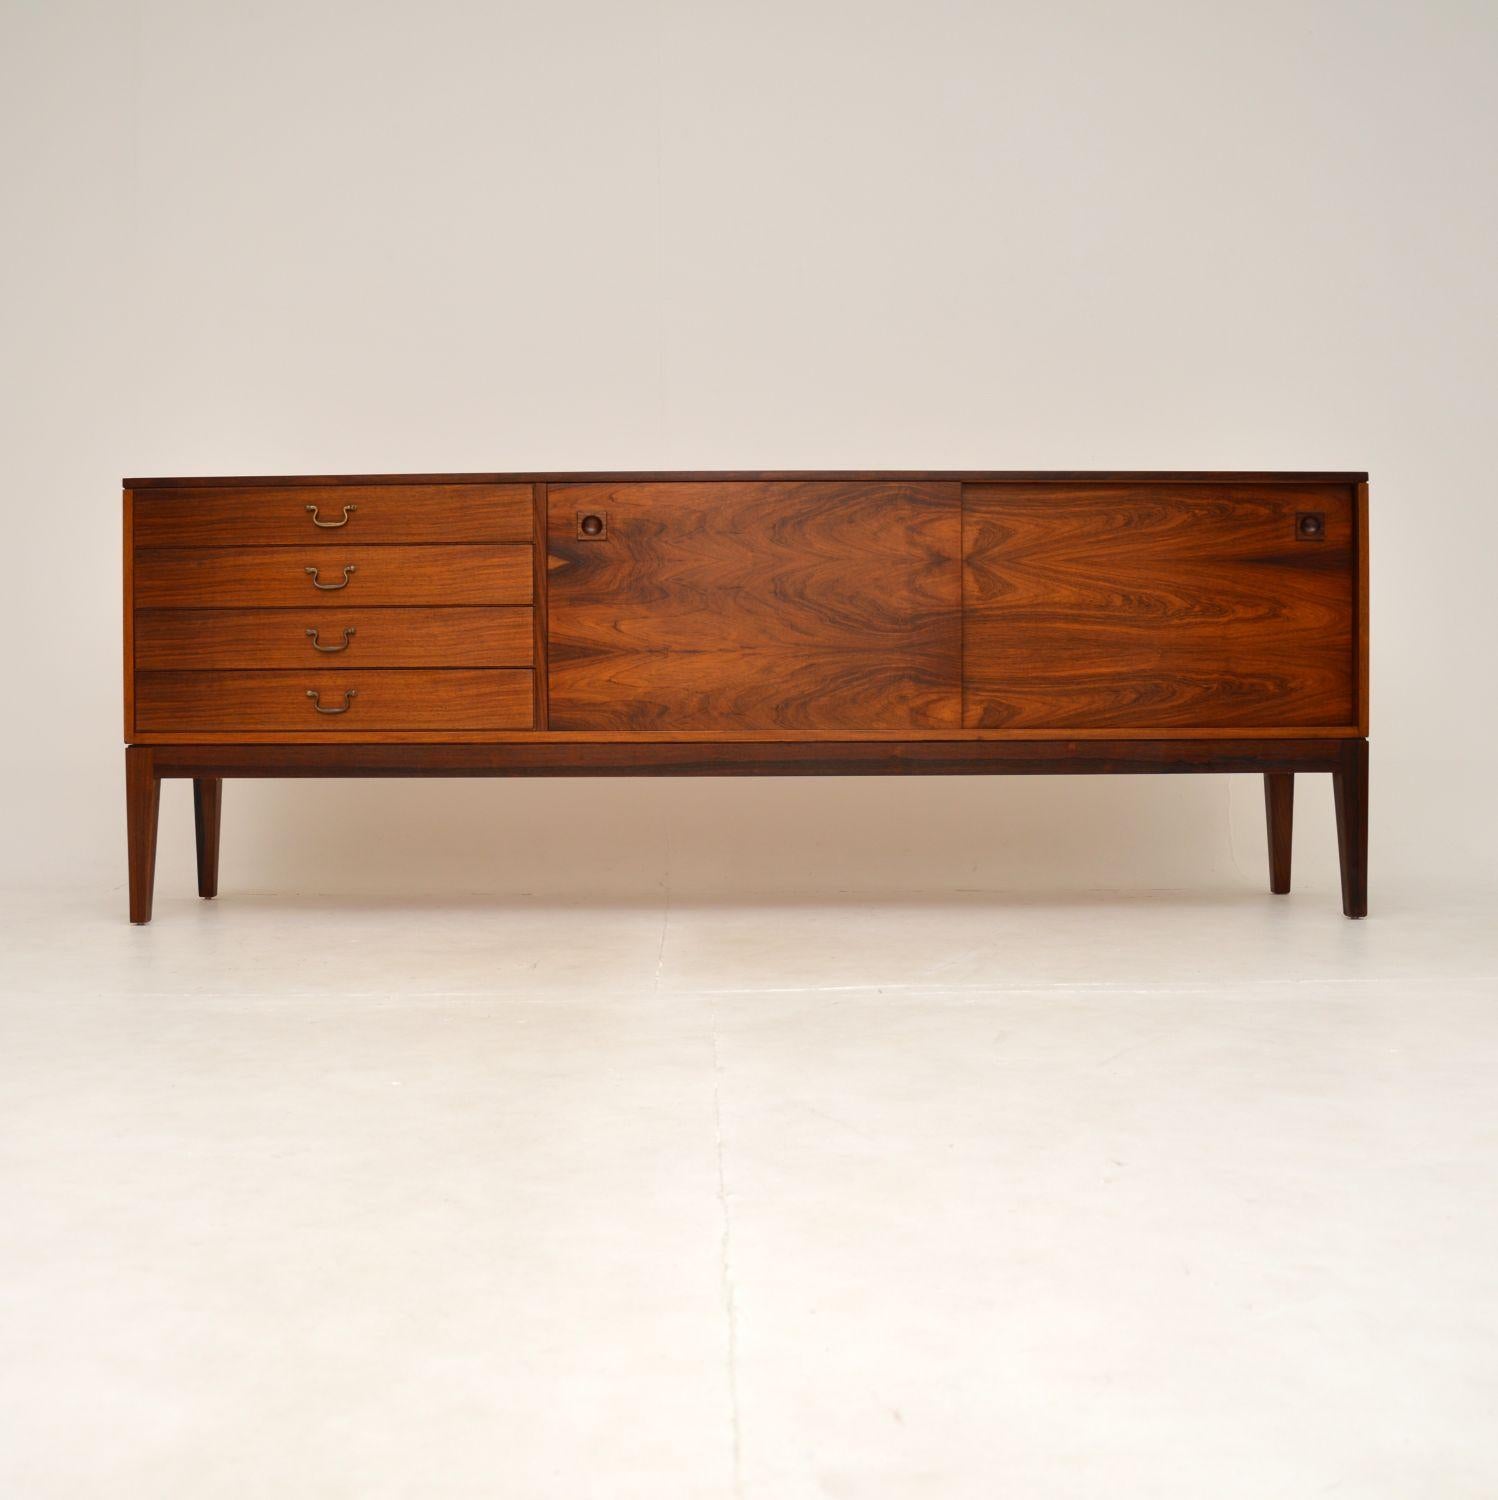 An absolutely stunning and extremely well made vintage sideboard by Robert Heritage for Archie Shine. This was made in England, and dates from the 1960’s.

The quality is outstanding, this sits on beautifully tapered legs, with two sliding doors on